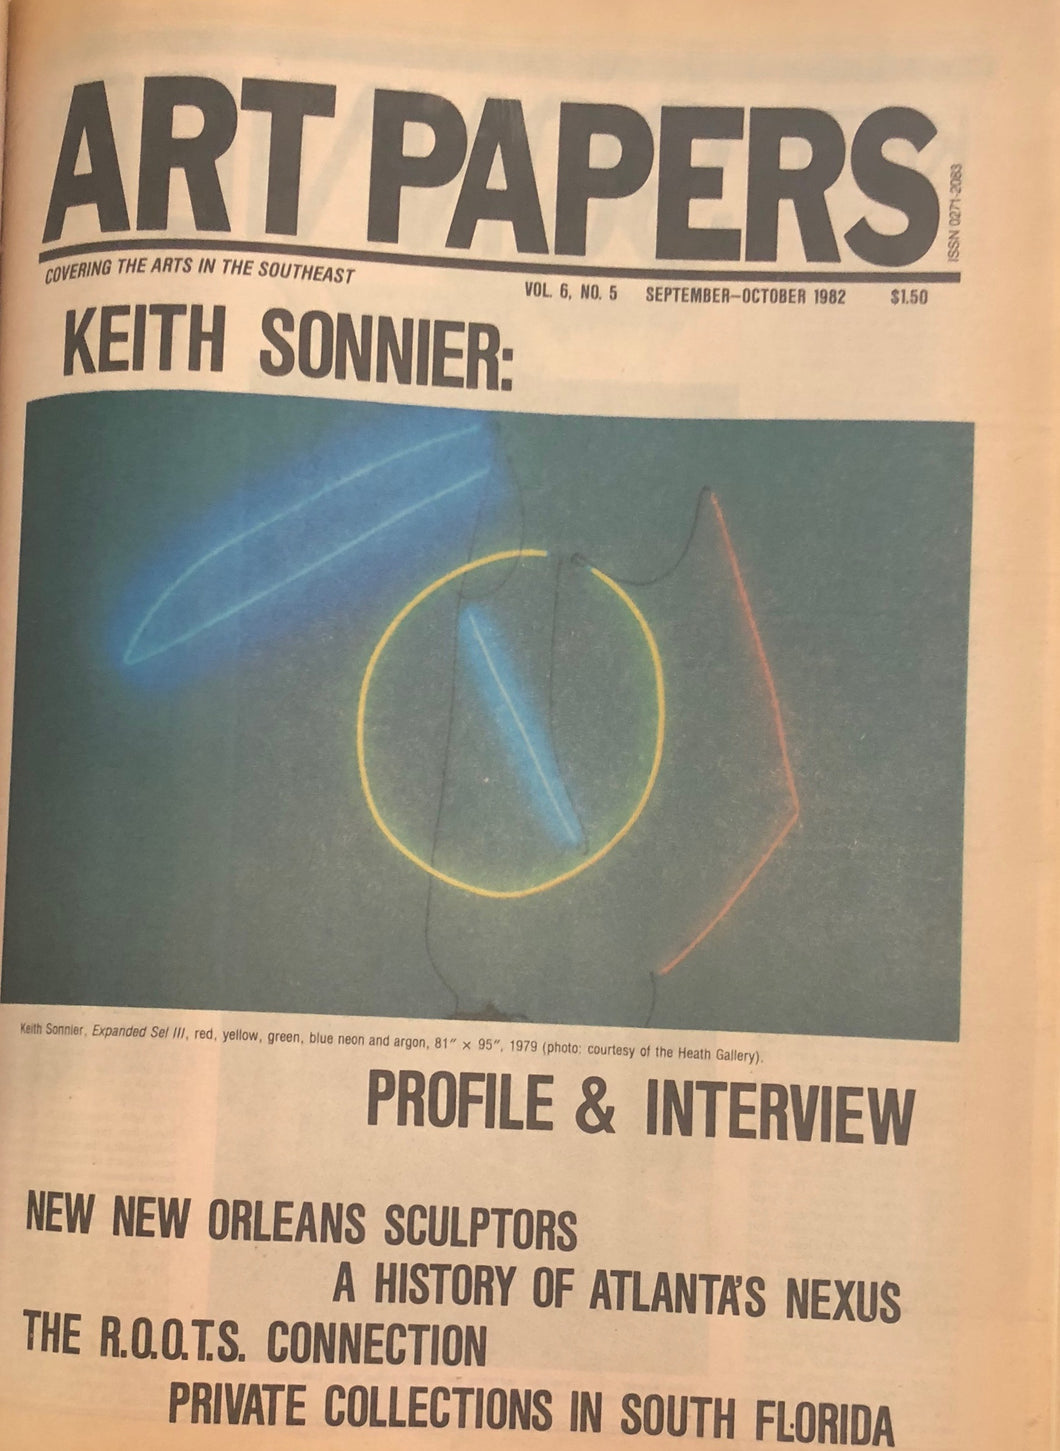 ART PAPERS 06.05 - Sept/Oct 1982 - SOLD OUT